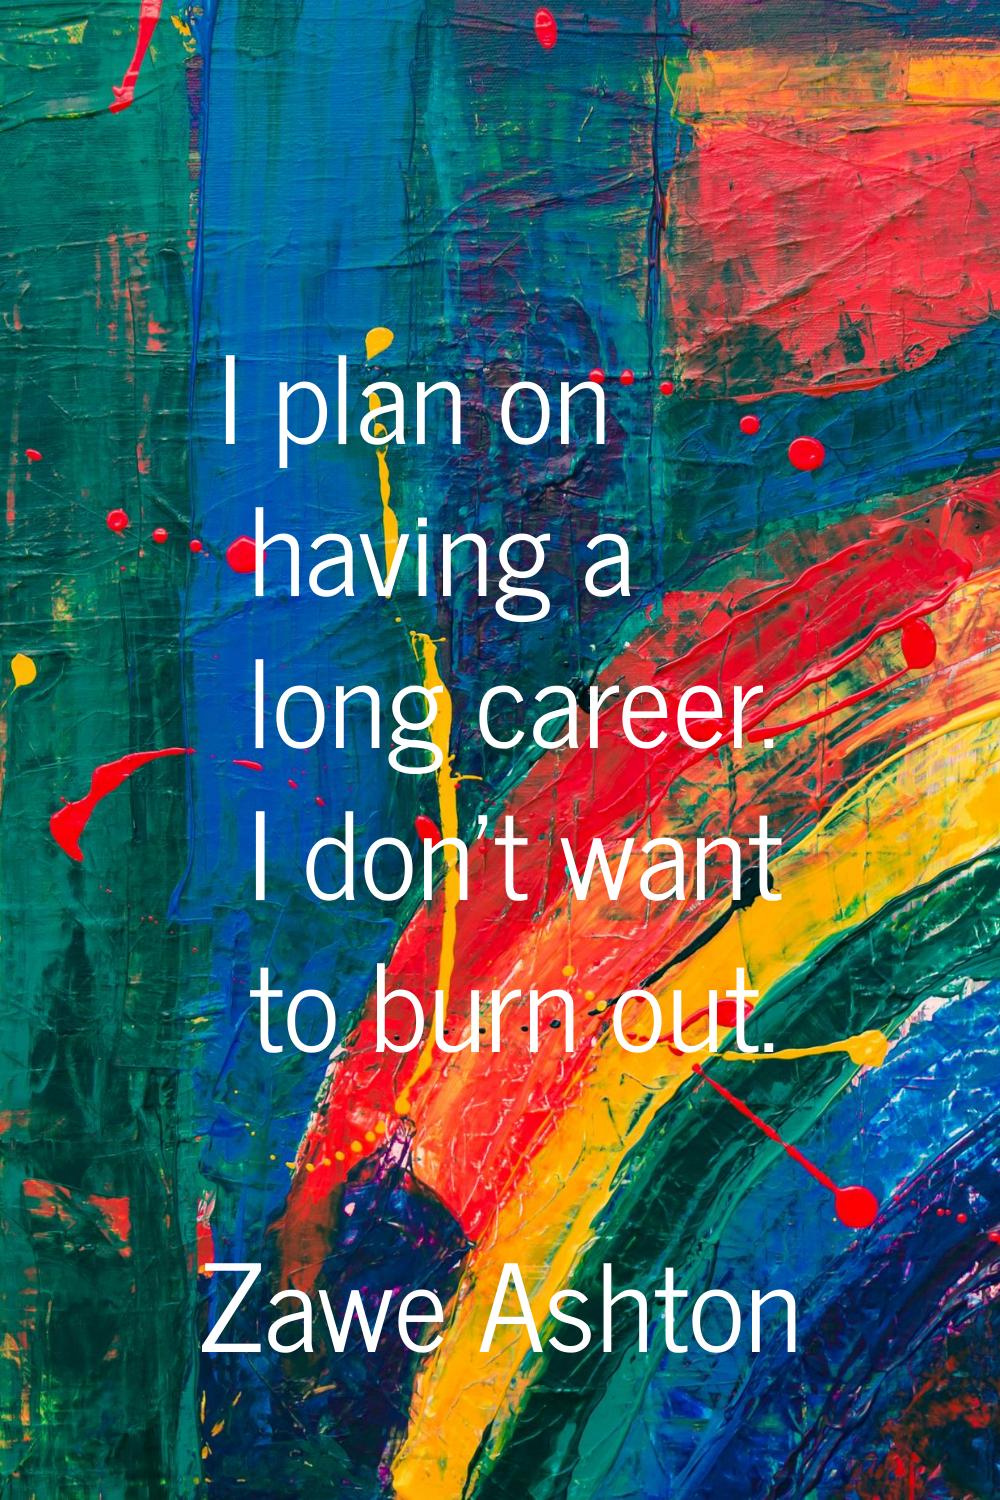 I plan on having a long career. I don't want to burn out.